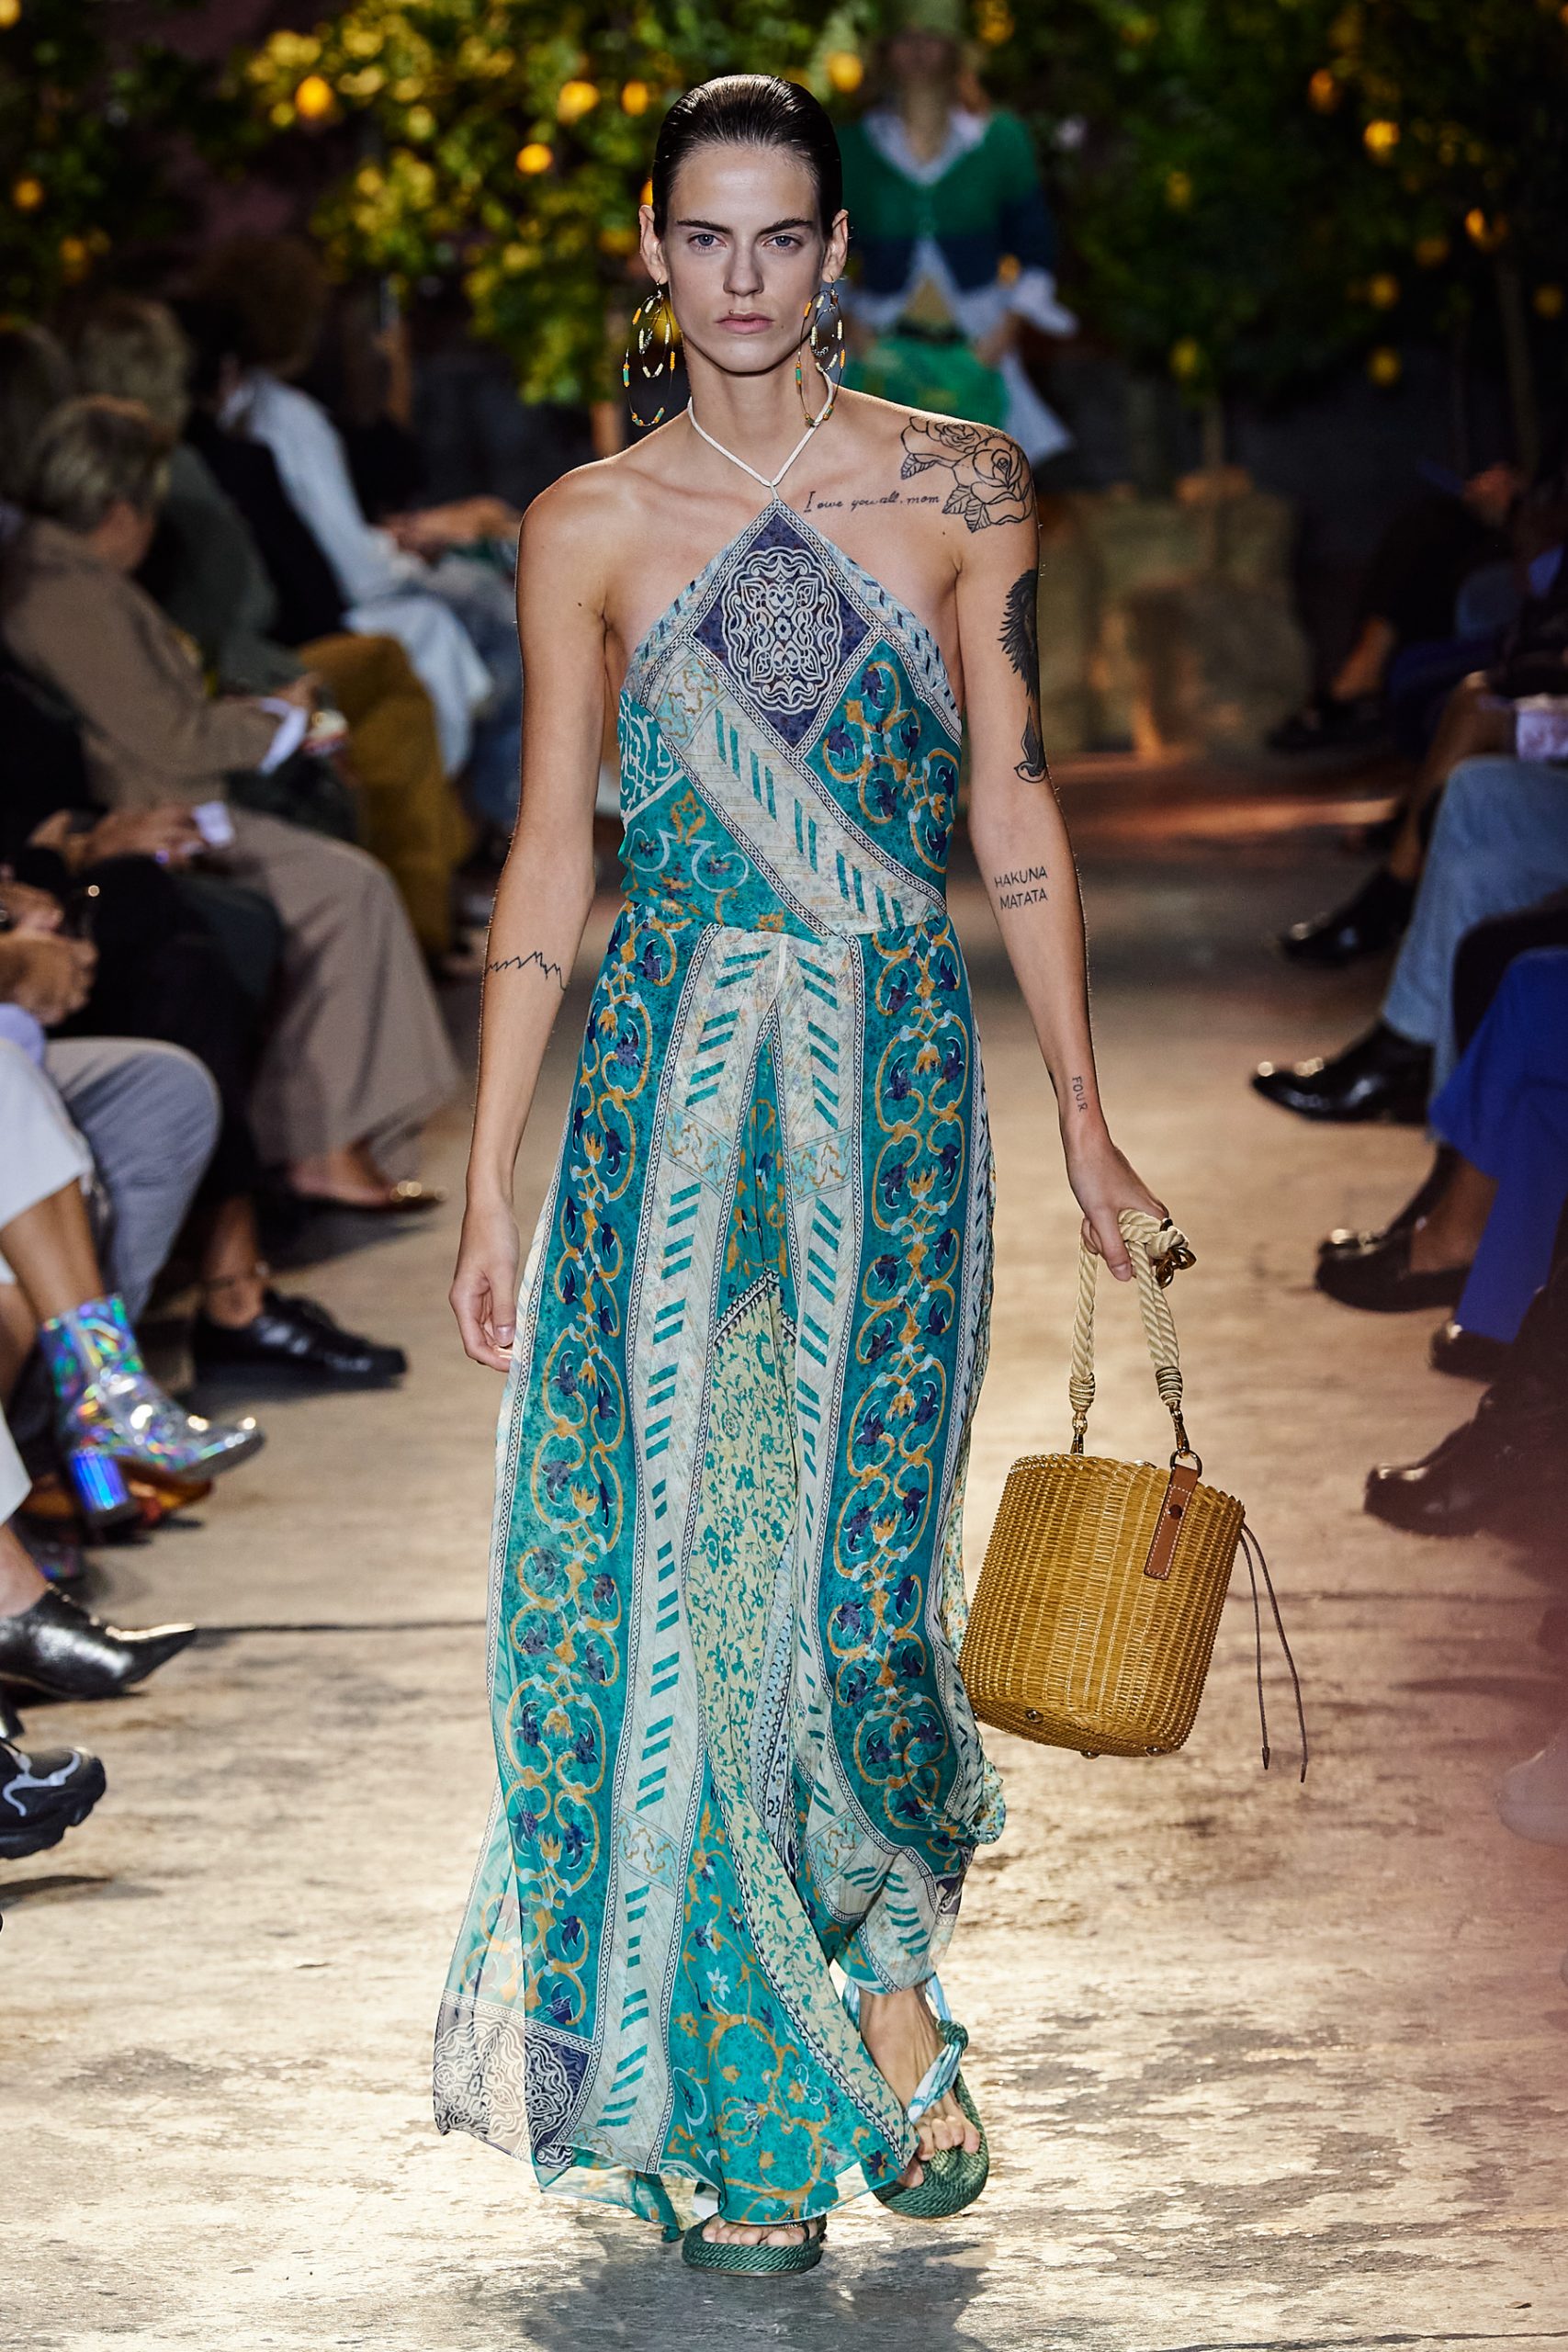 Top 20 Most Popular Runway Models of Spring 2021 | The Impression